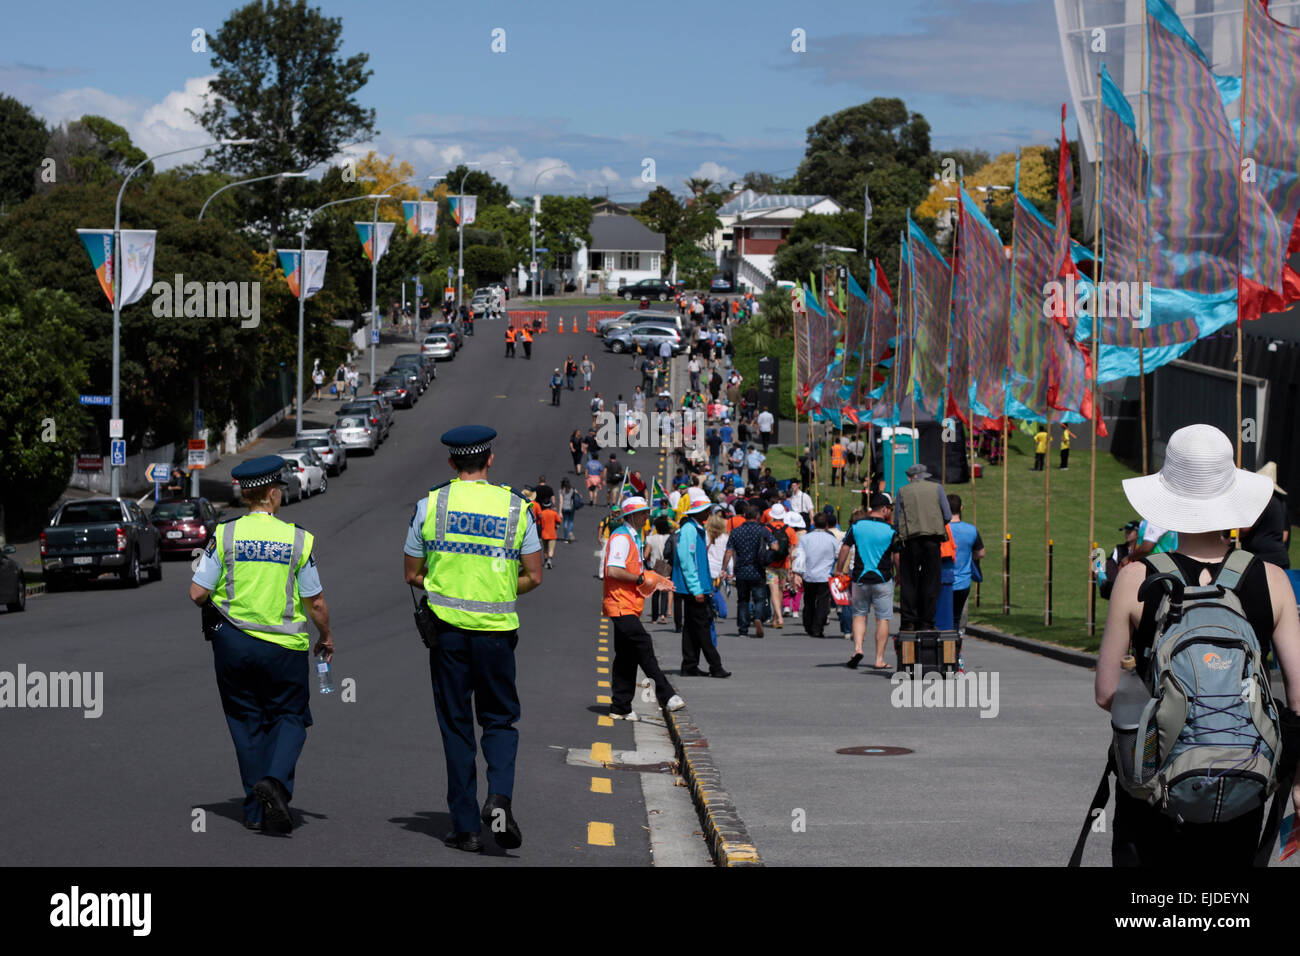 Auckland, New Zealand. 24th March, 2015. Cricket fans gather to the ICC Cricket World Cup 2015 at Eden Park Rugby Stadium to watch the Semi Final game One Day International ODI match between New Zealand and South Africa in Auckland, New Zealand on Tuesday, March 24, 2015. Stock Photo